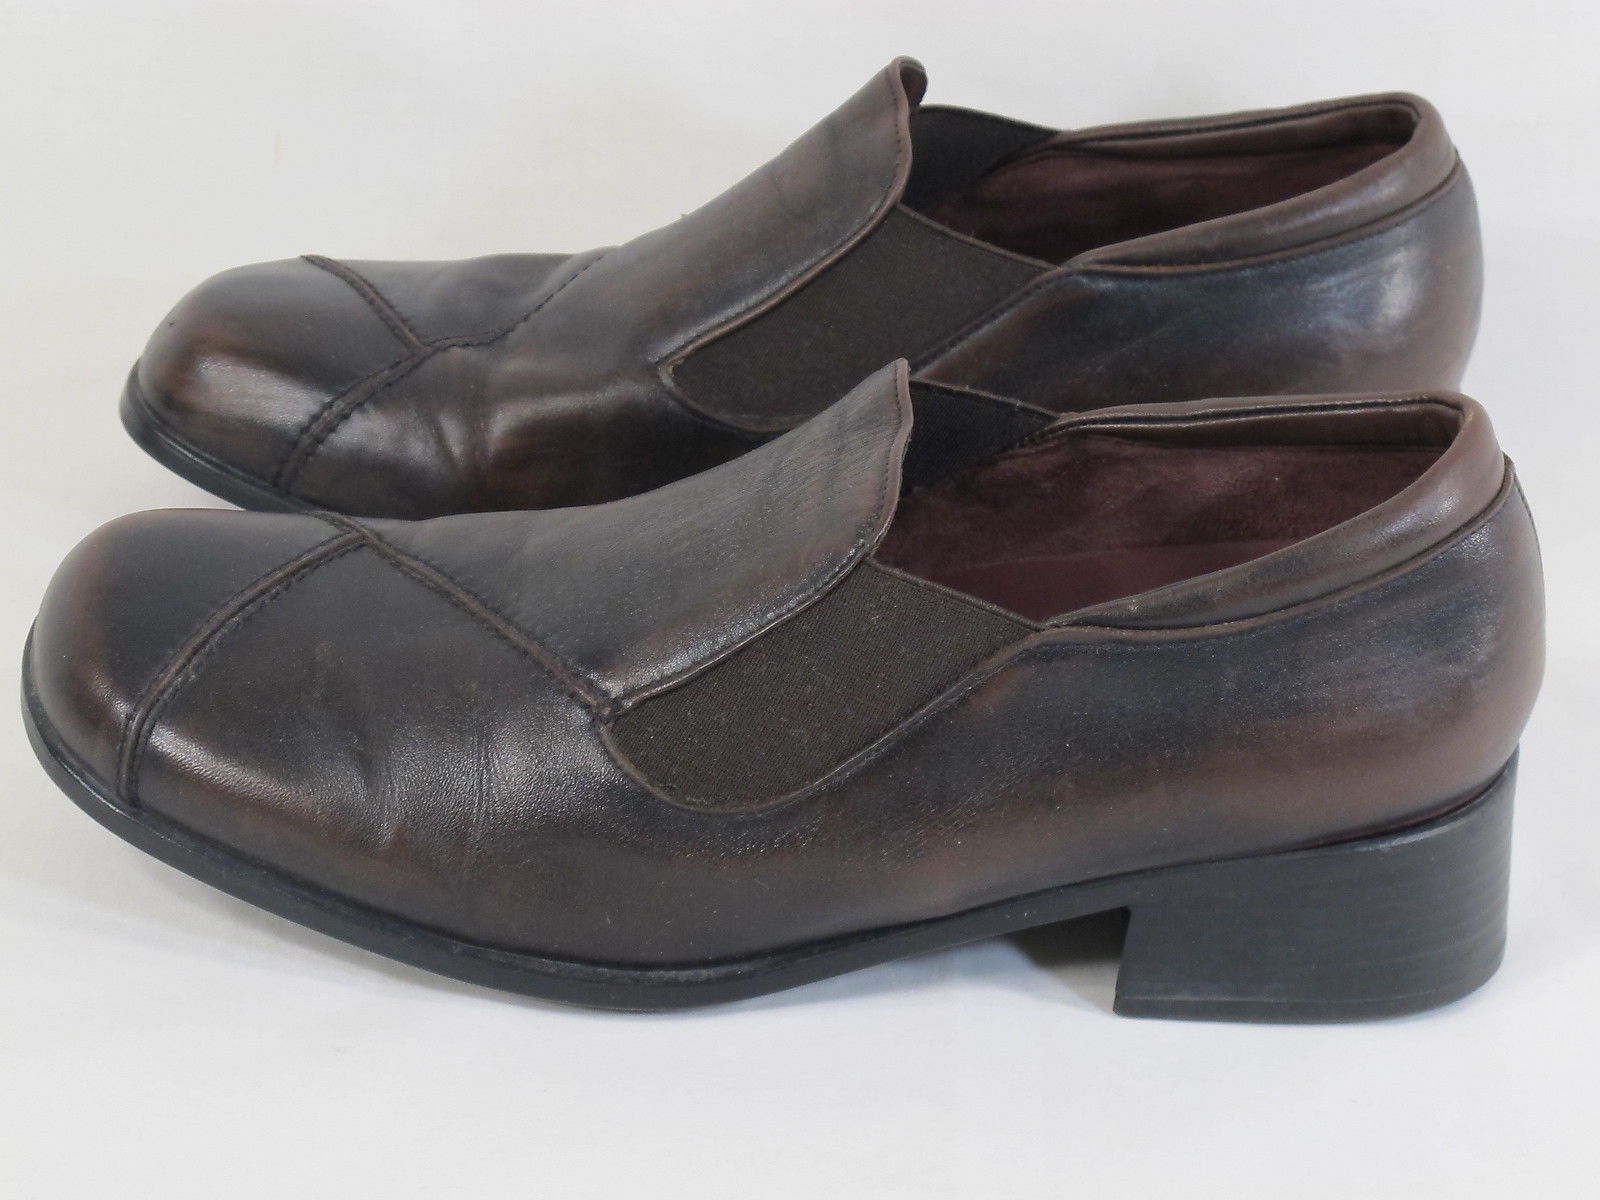 Kumfs Brown Leather Comfort Loafer Shoes Size 11 M US Excellent ...